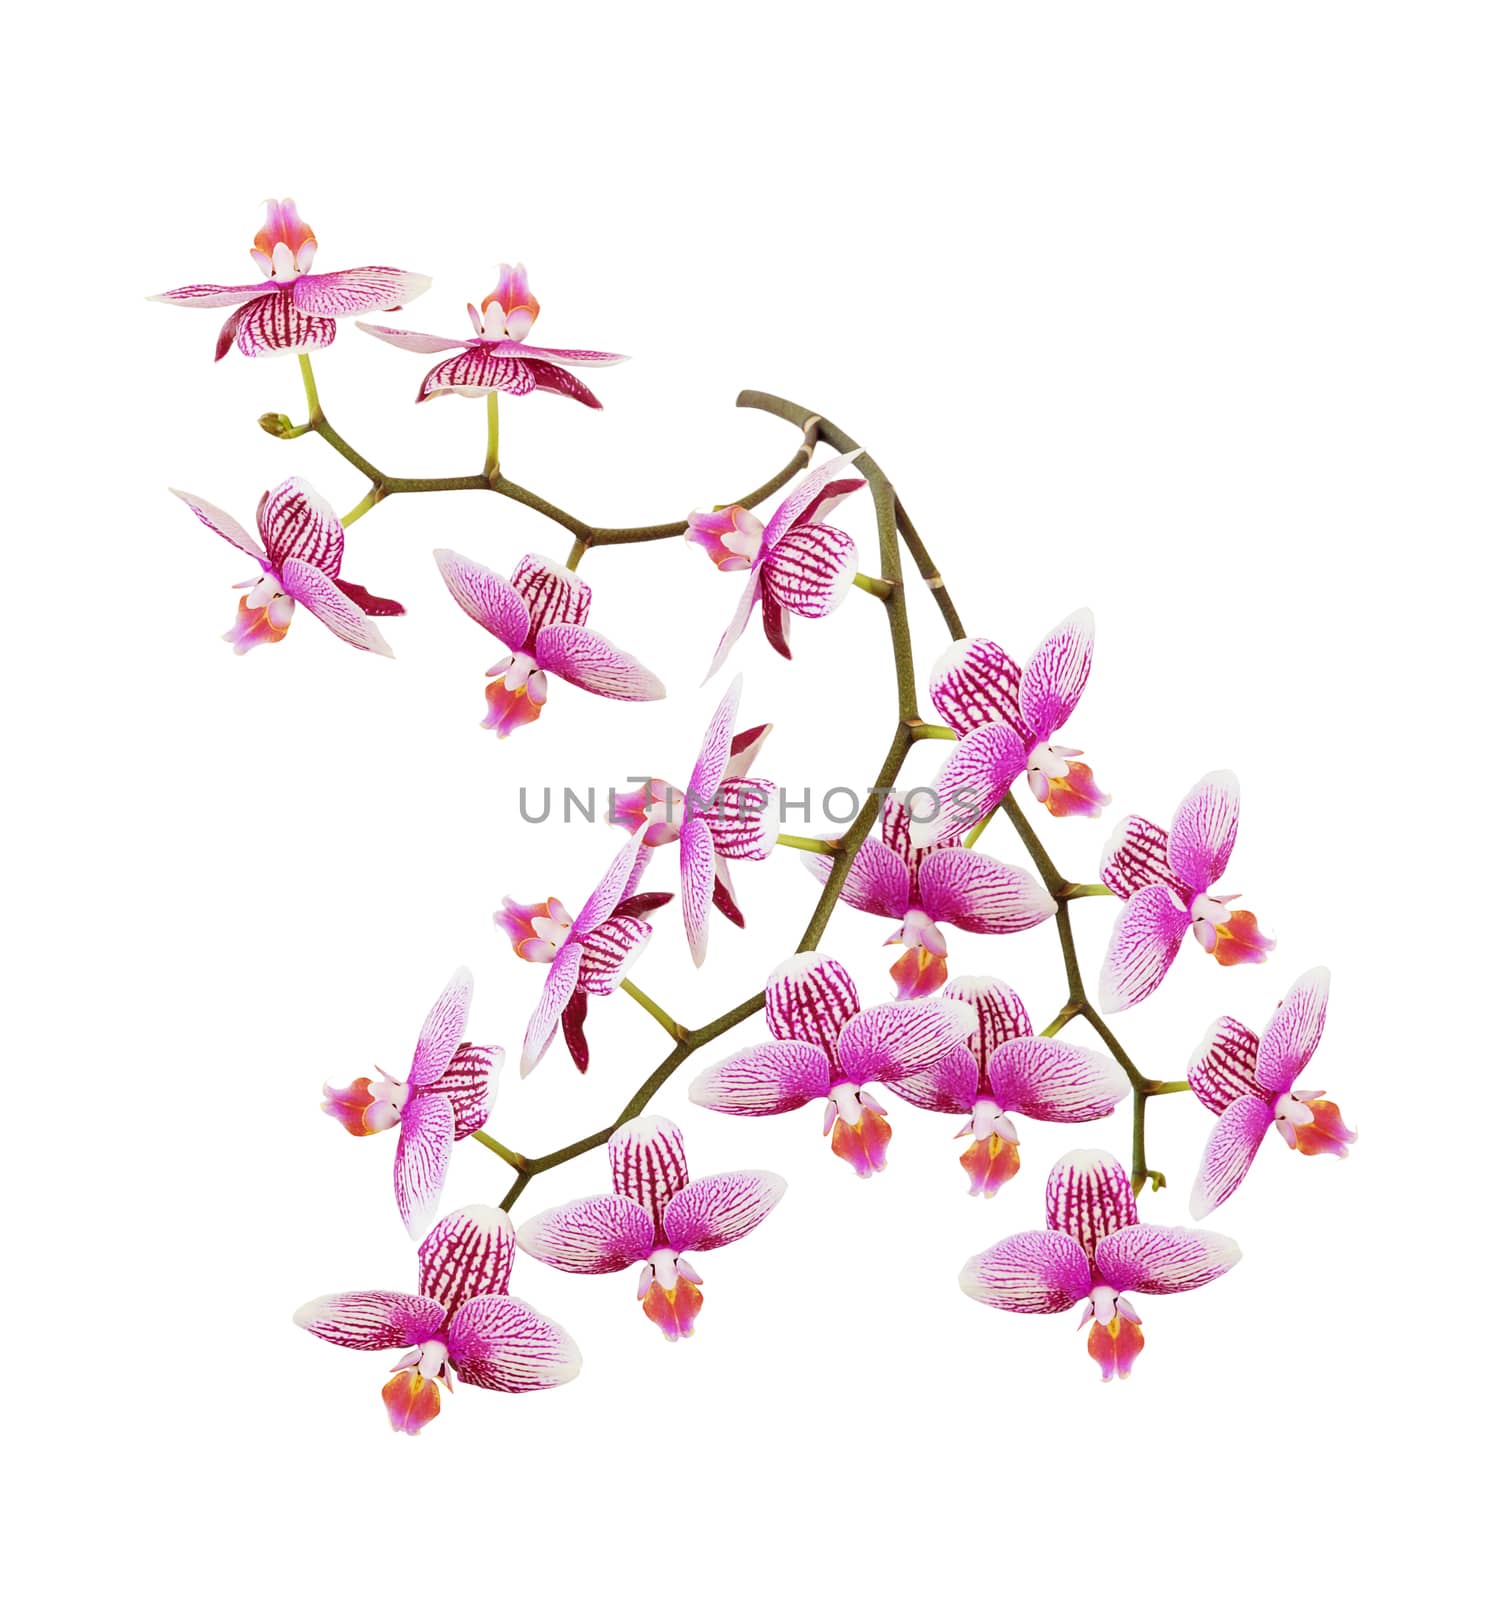 Large branch of phalaenopsis orchid with a lot of striped white and pink flowers isolated on a white background